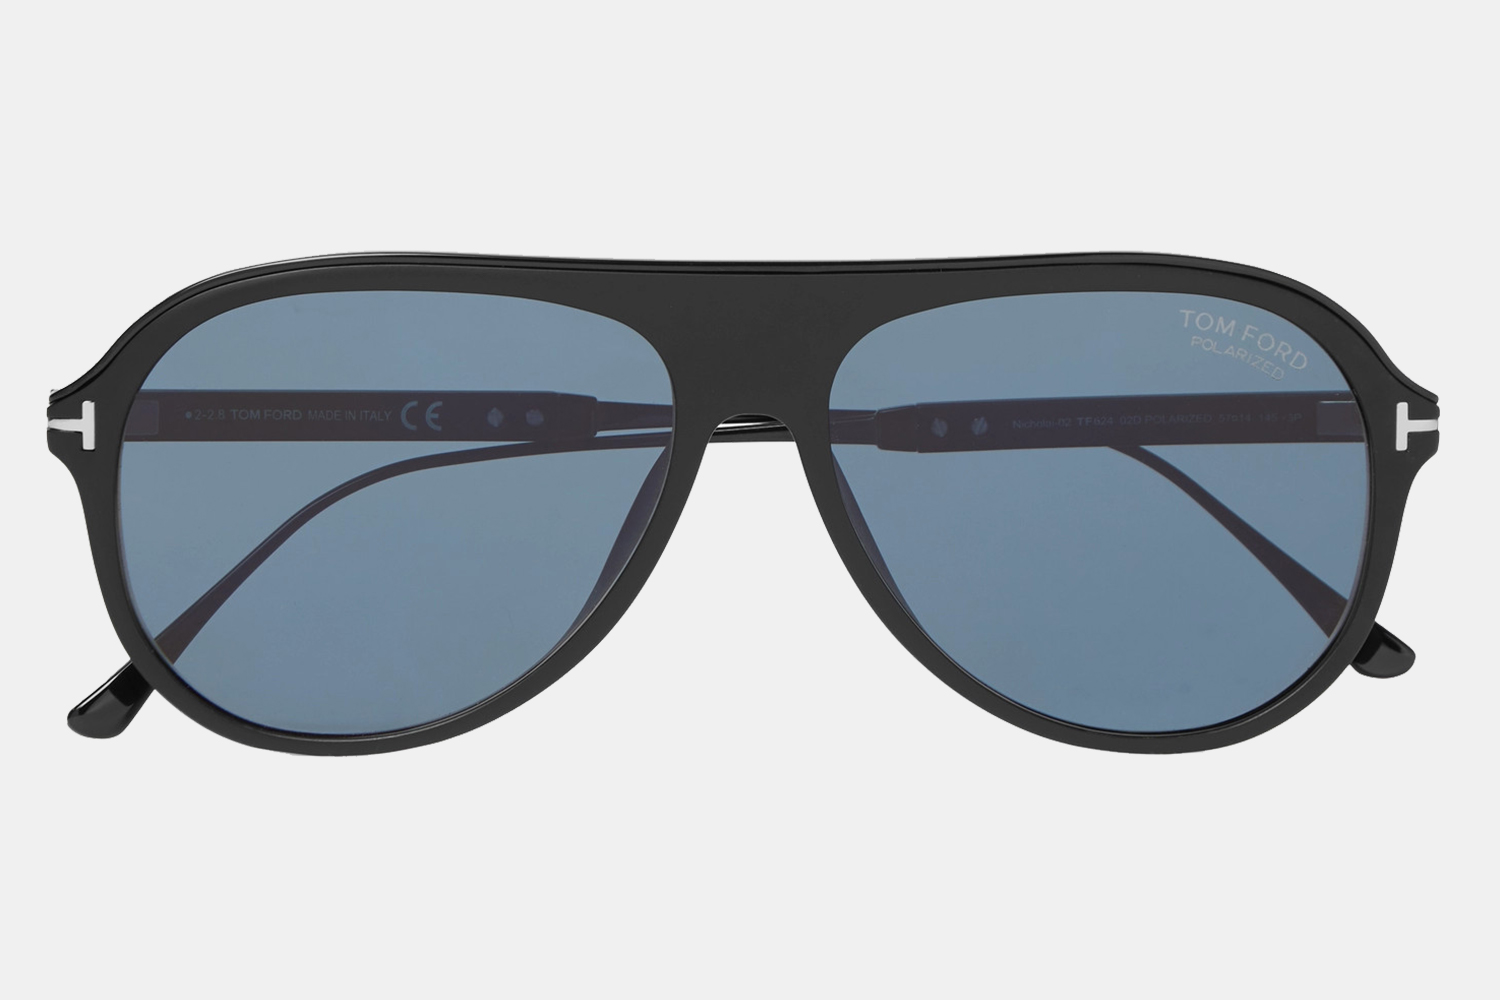 Take Hundreds Off Sunglasses From Tom Ford, Persol and More - InsideHook